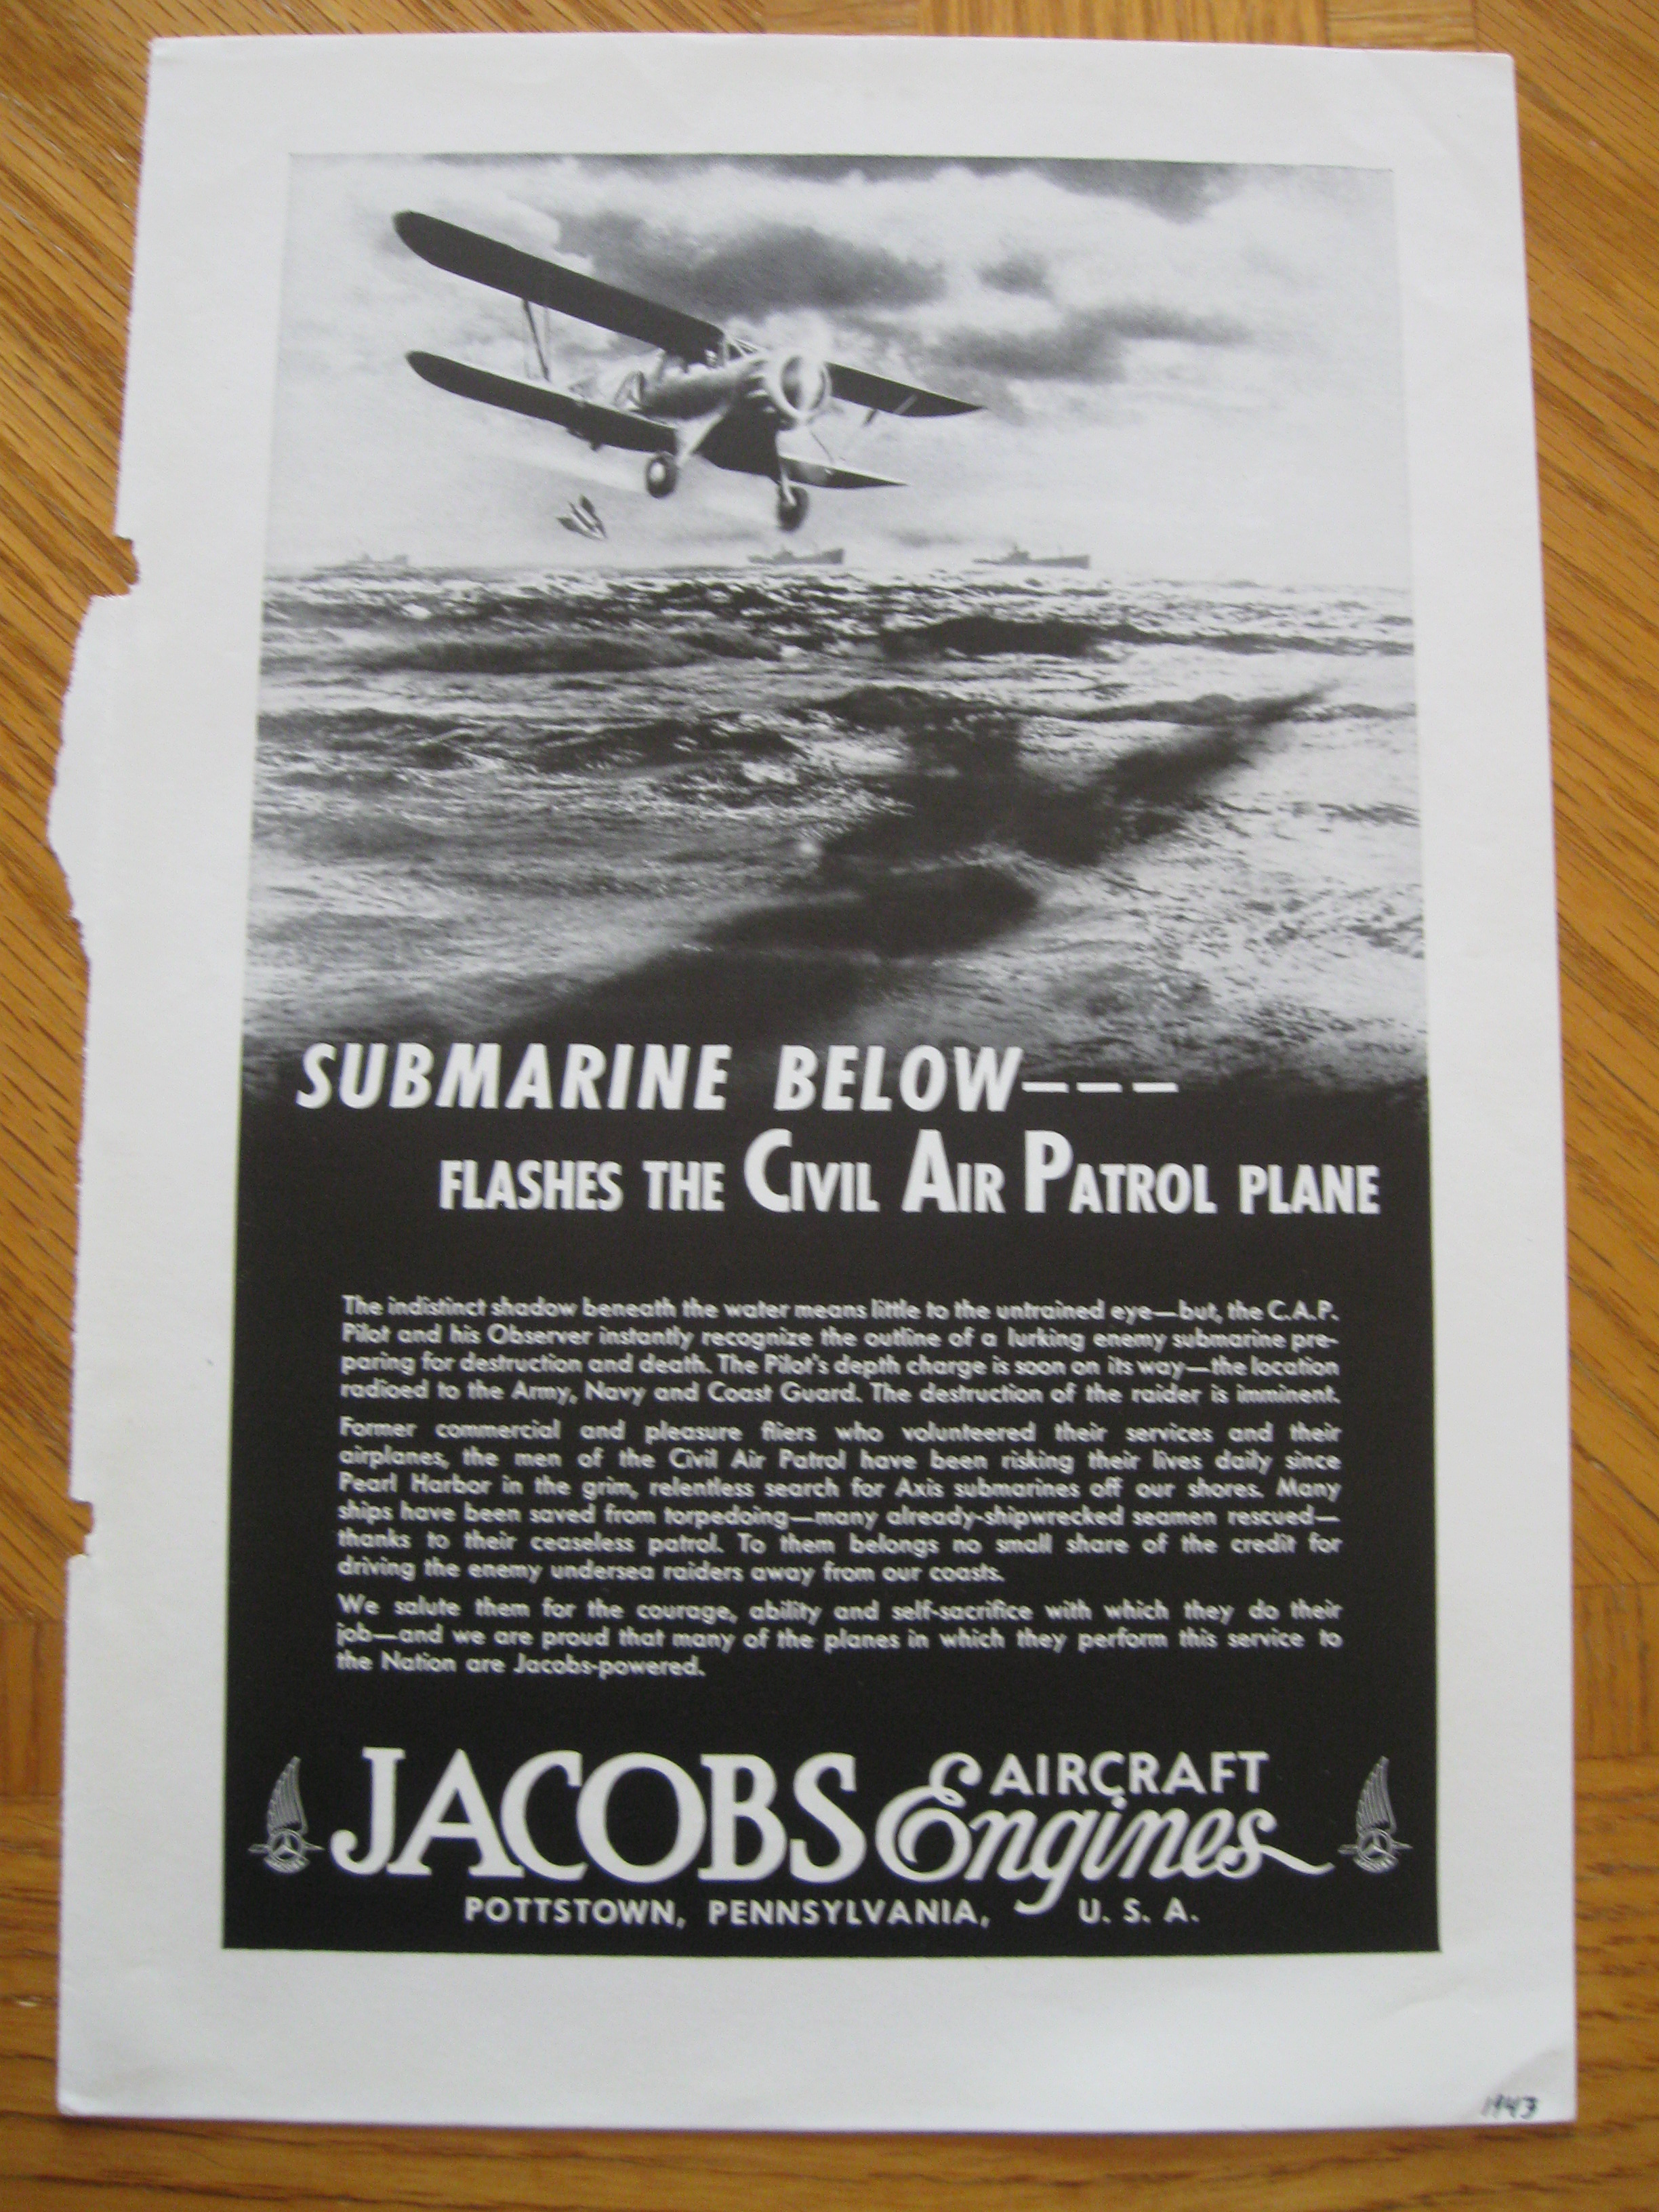 Jacobs Engines ad from a 1943 National G